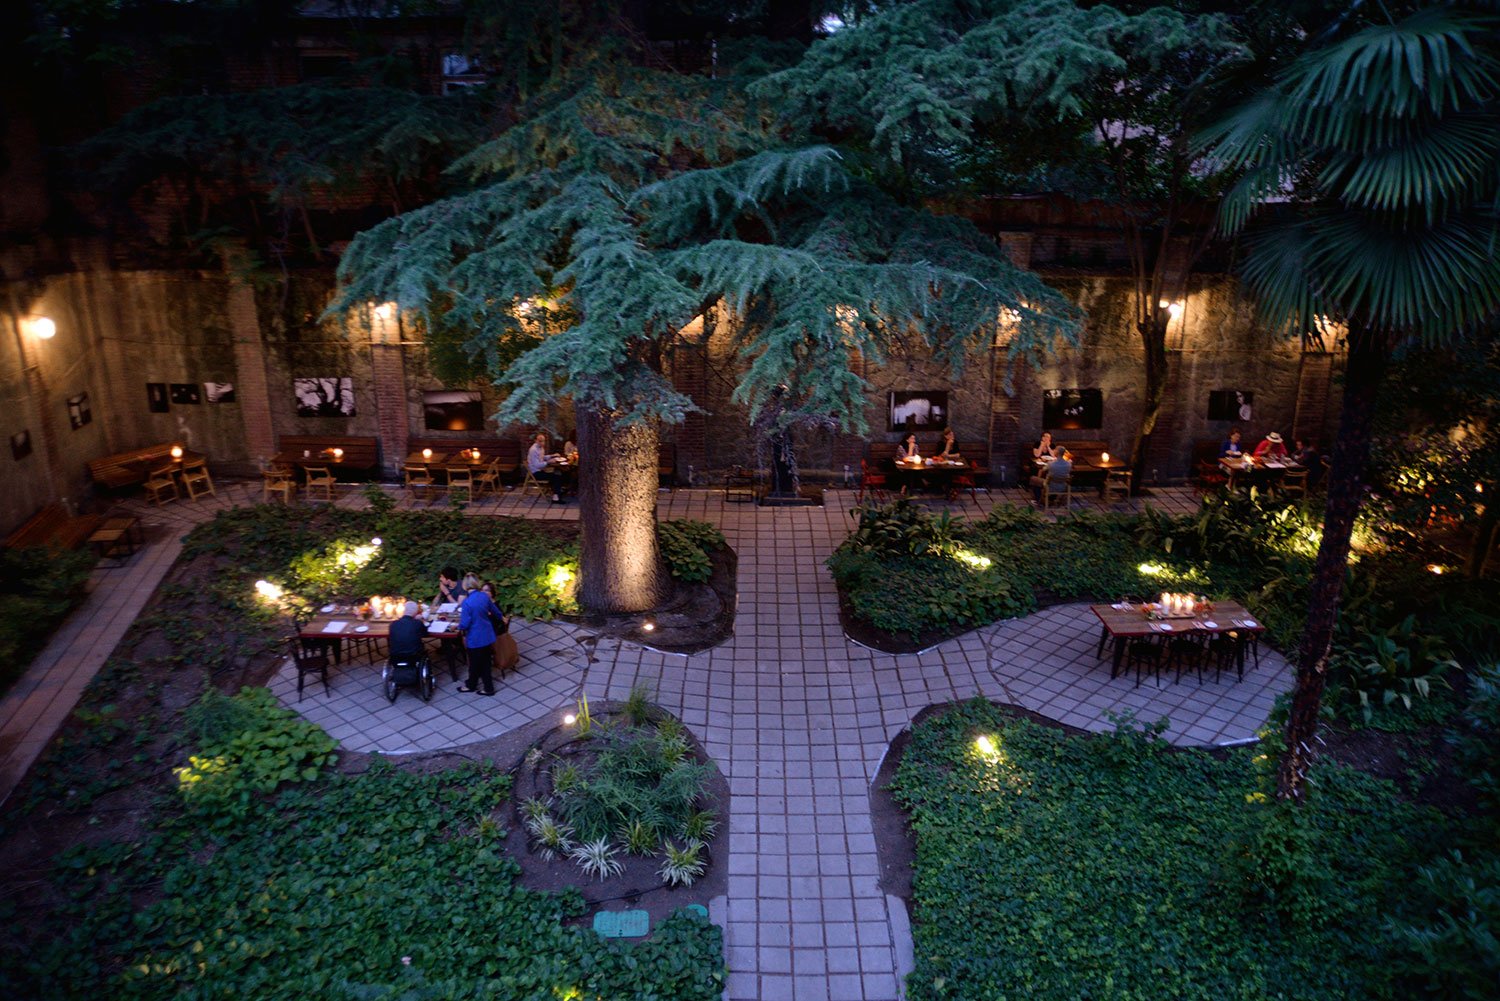 The courtyard at Cafe Littera